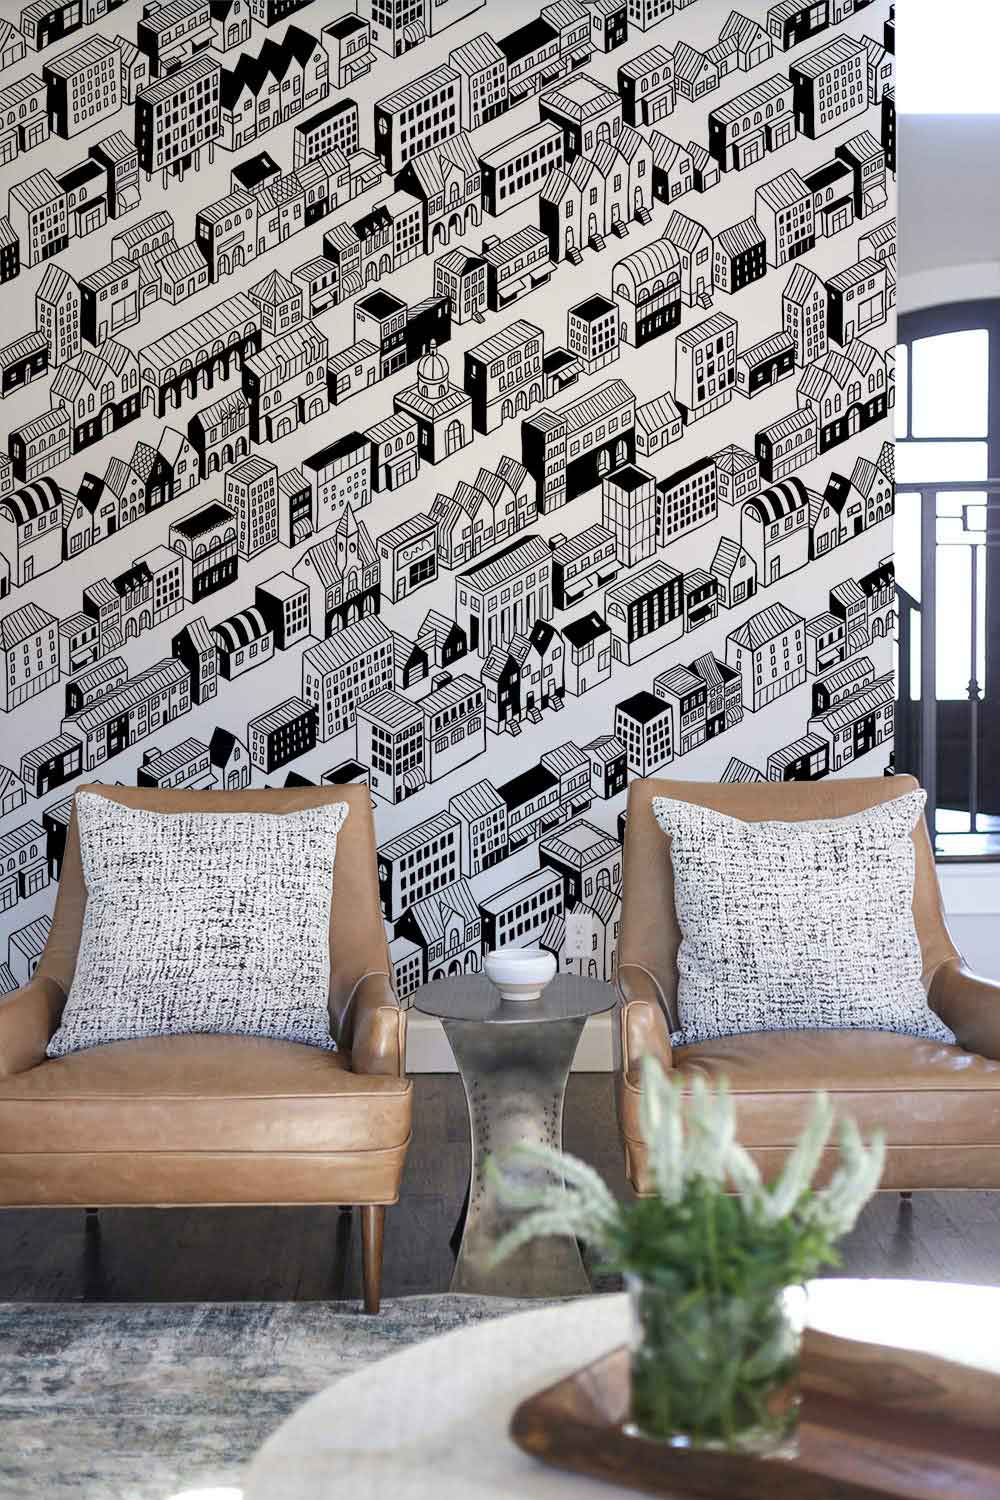 sketched houses in order wall mural for living room